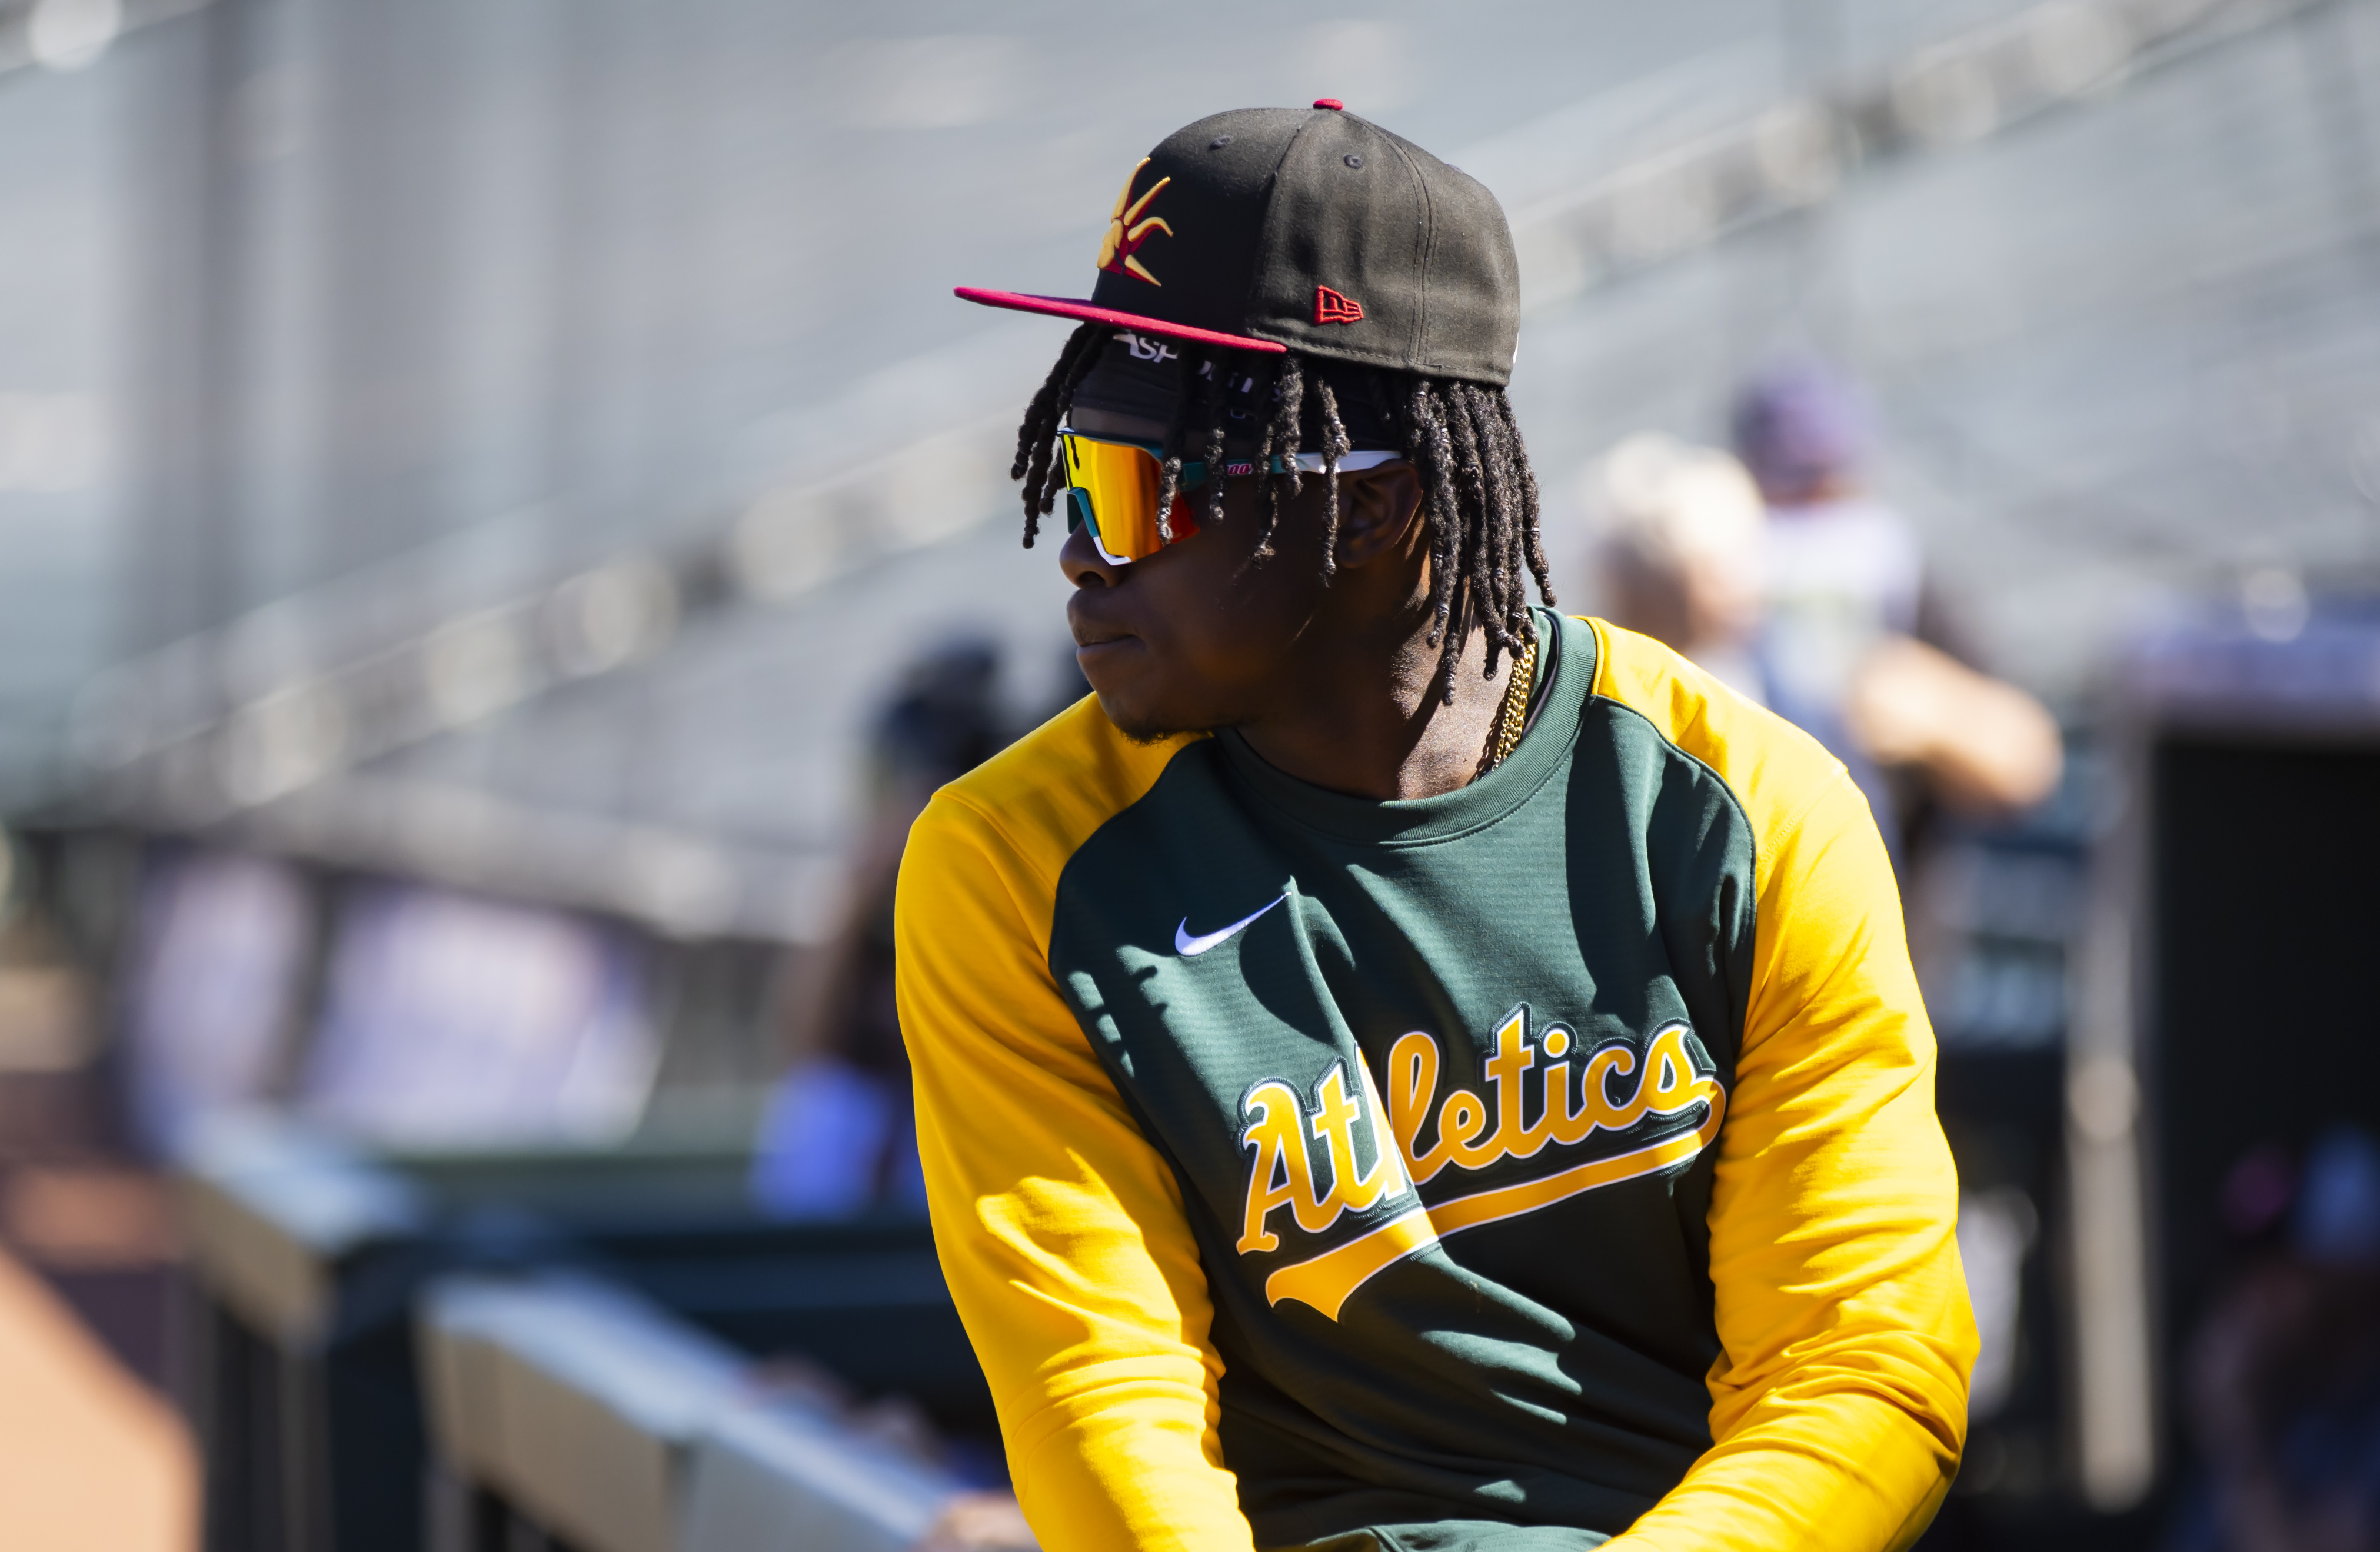 MLBbro Lawrence Butler Is Part Of “The New Oakland” A's Youth Movement